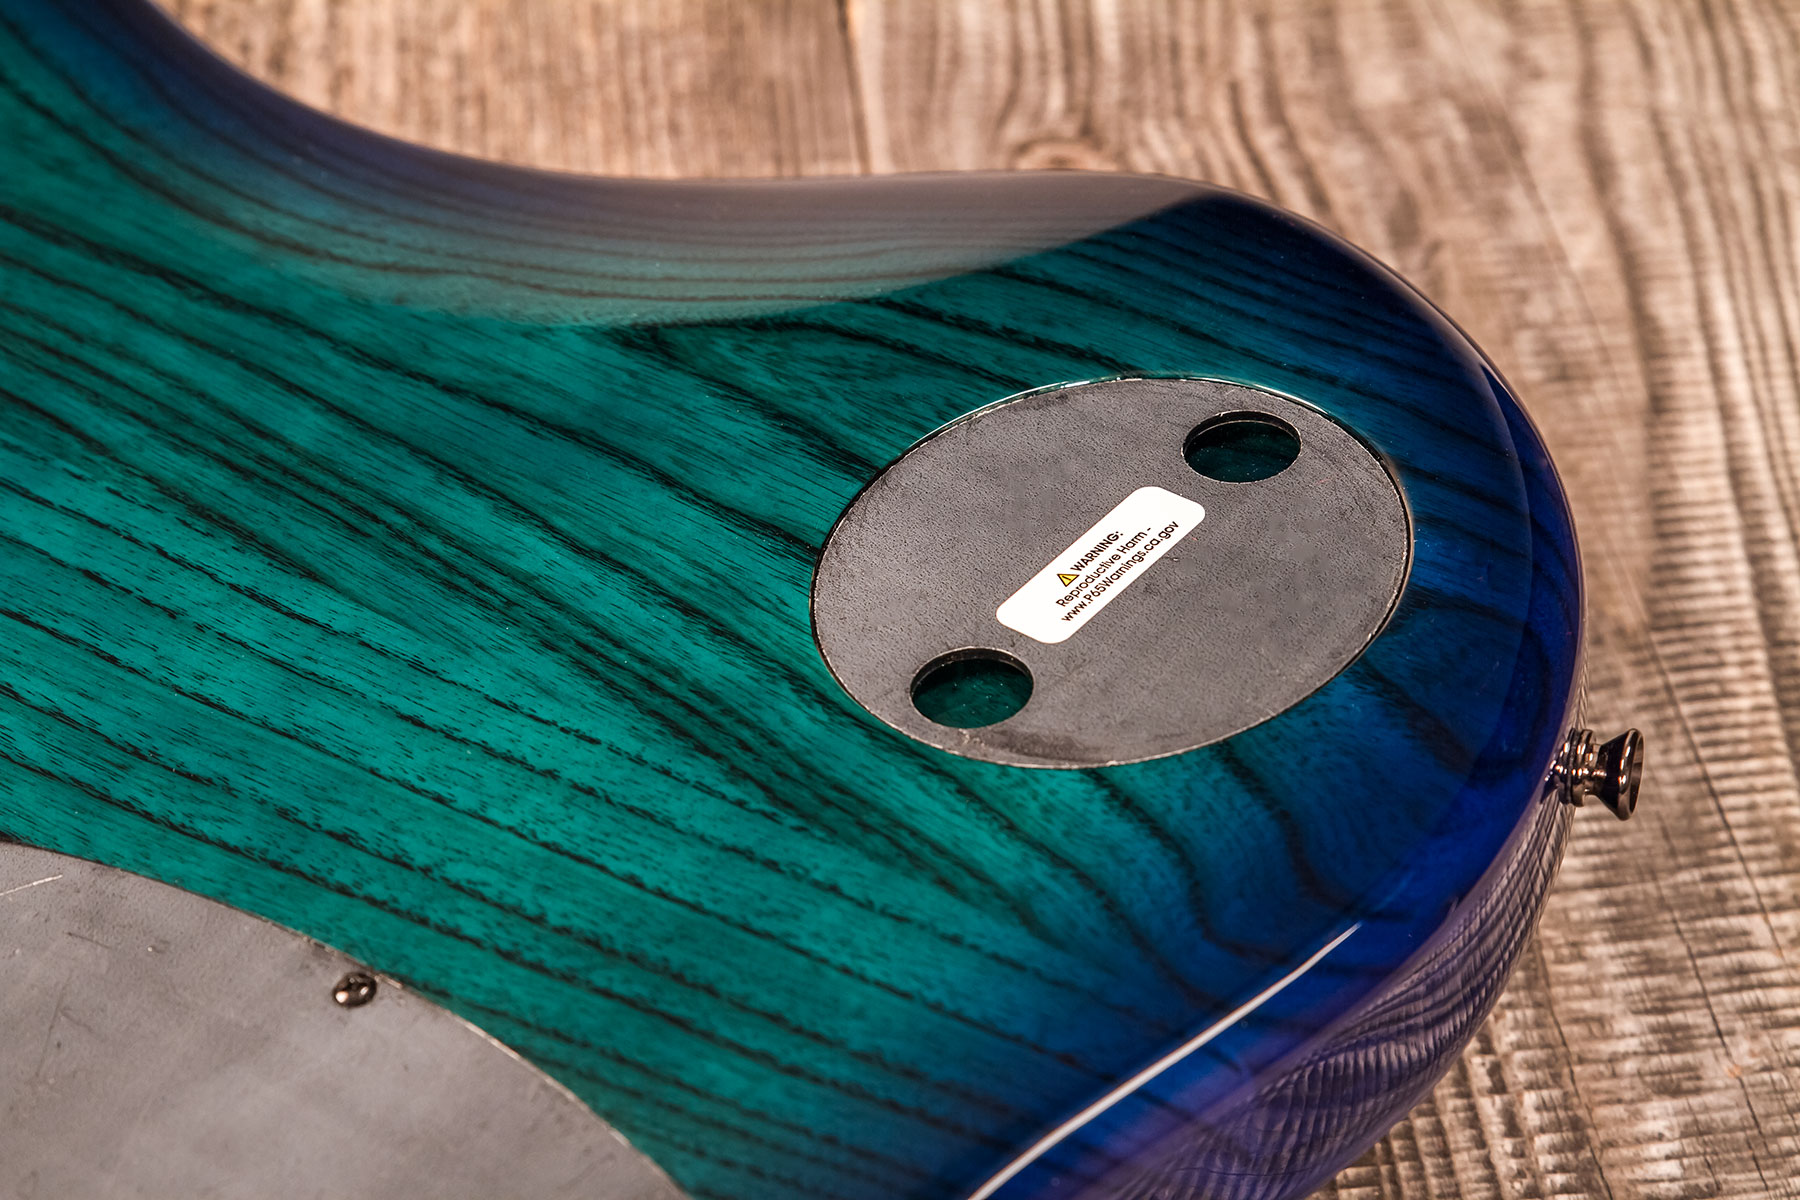 Dingwall Combustion Cb2 4c 2pu Active Pf - Whalepool Burst - Solid body electric bass - Variation 7